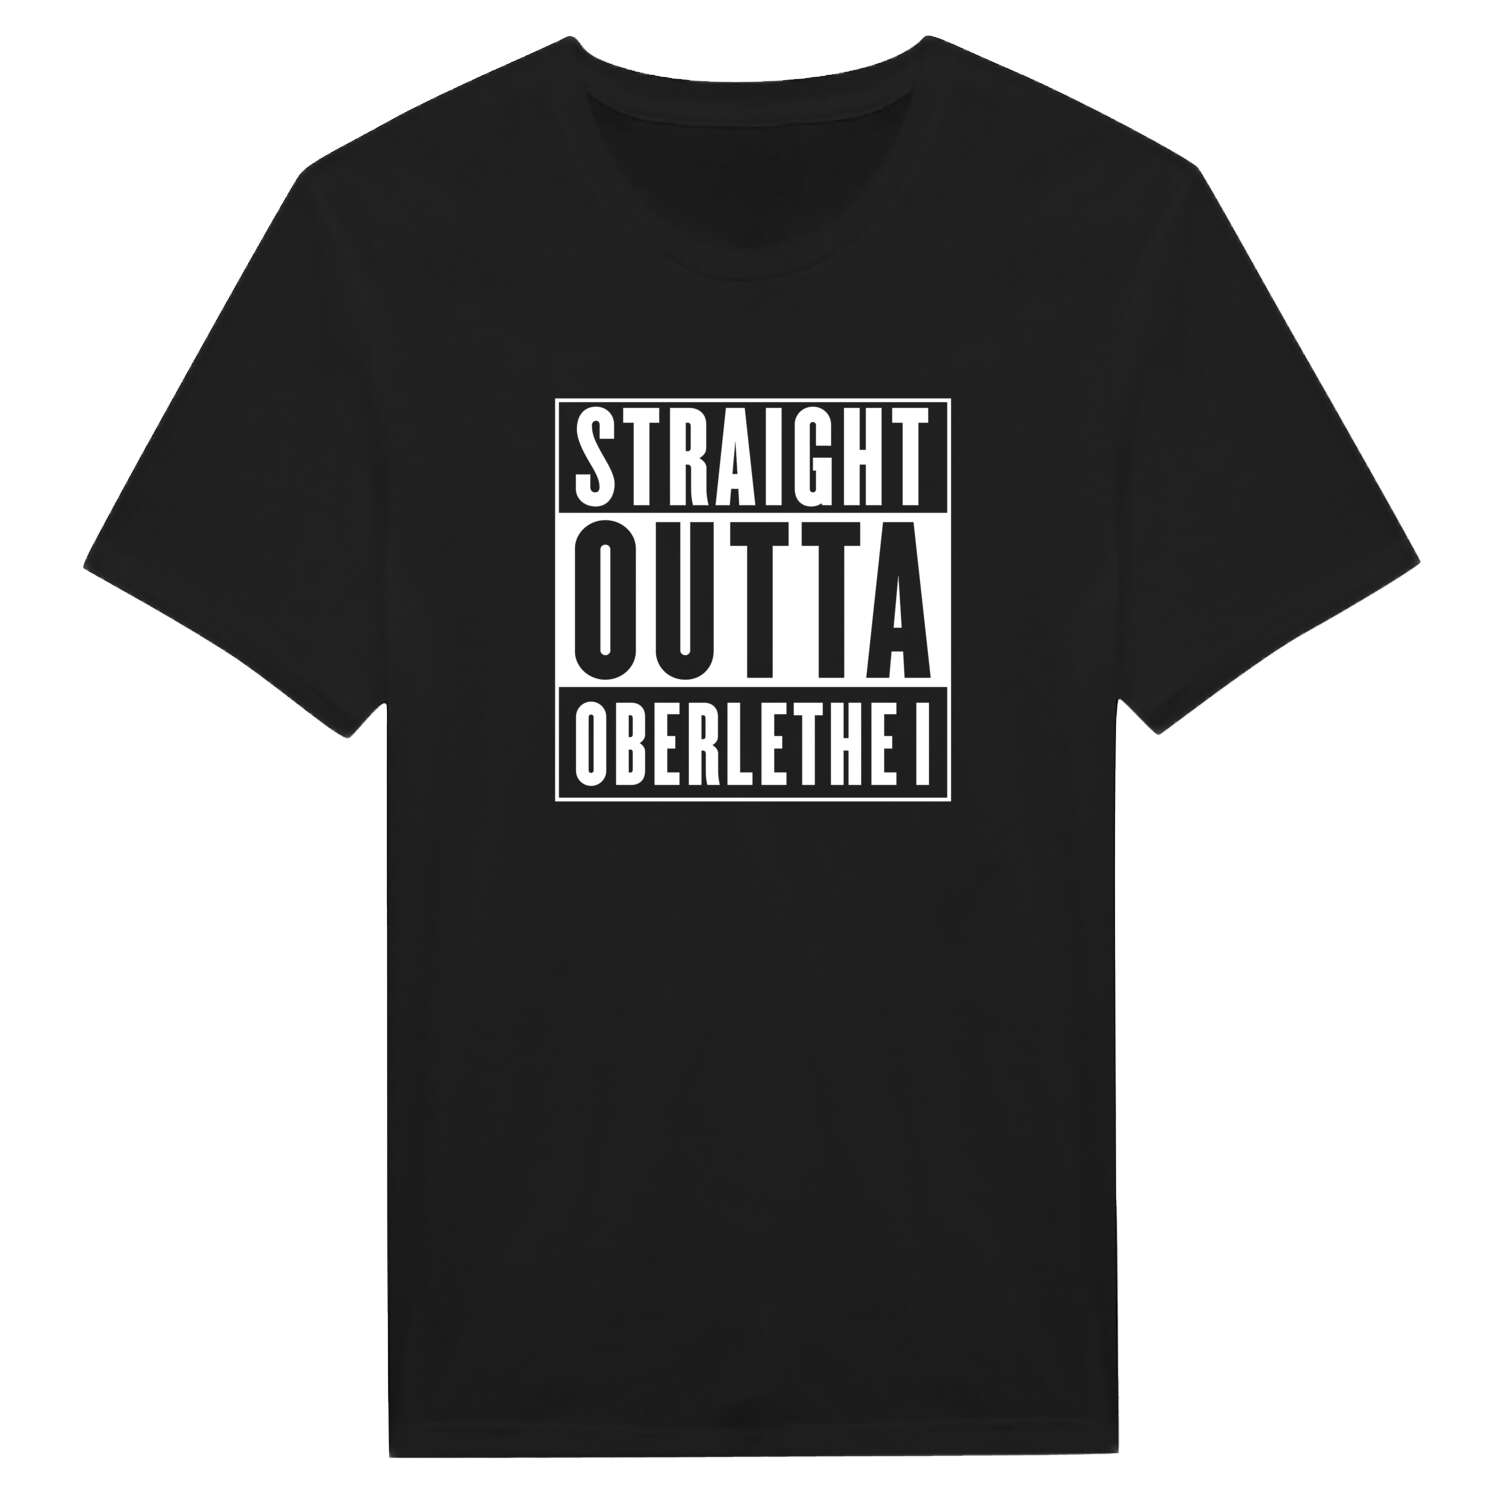 Oberlethe I T-Shirt »Straight Outta«